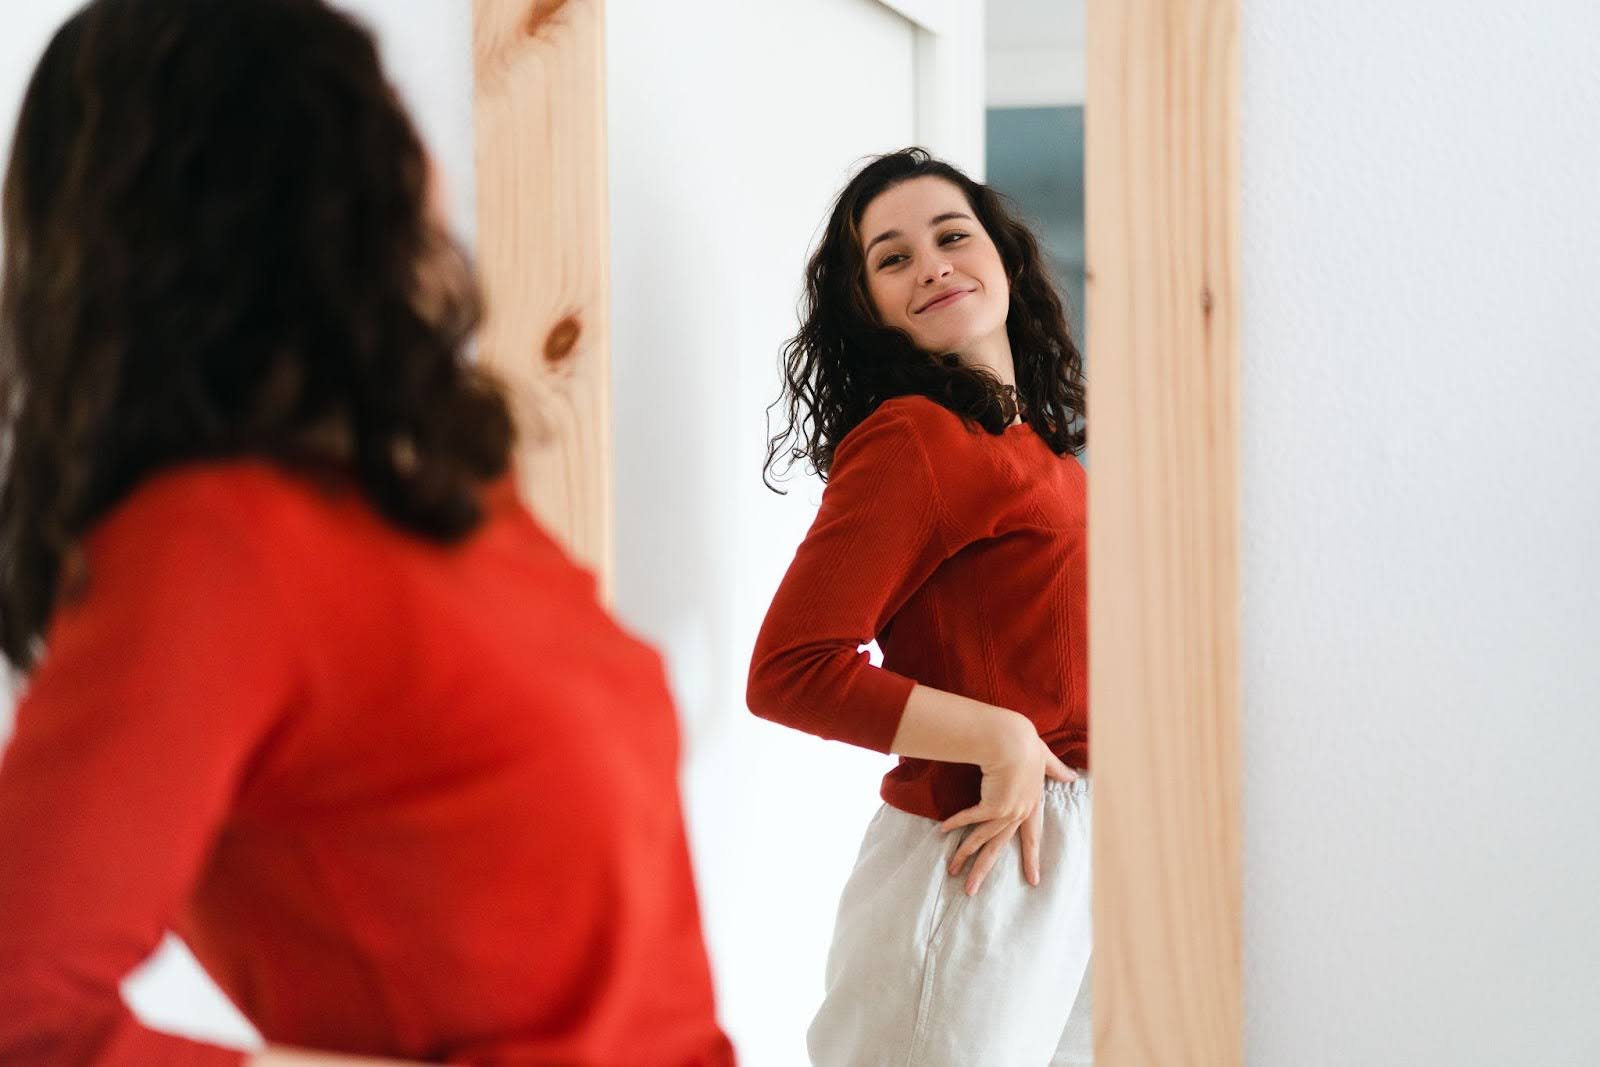 Woman smiling looking at herself in the mirror in a red shirt and white pants